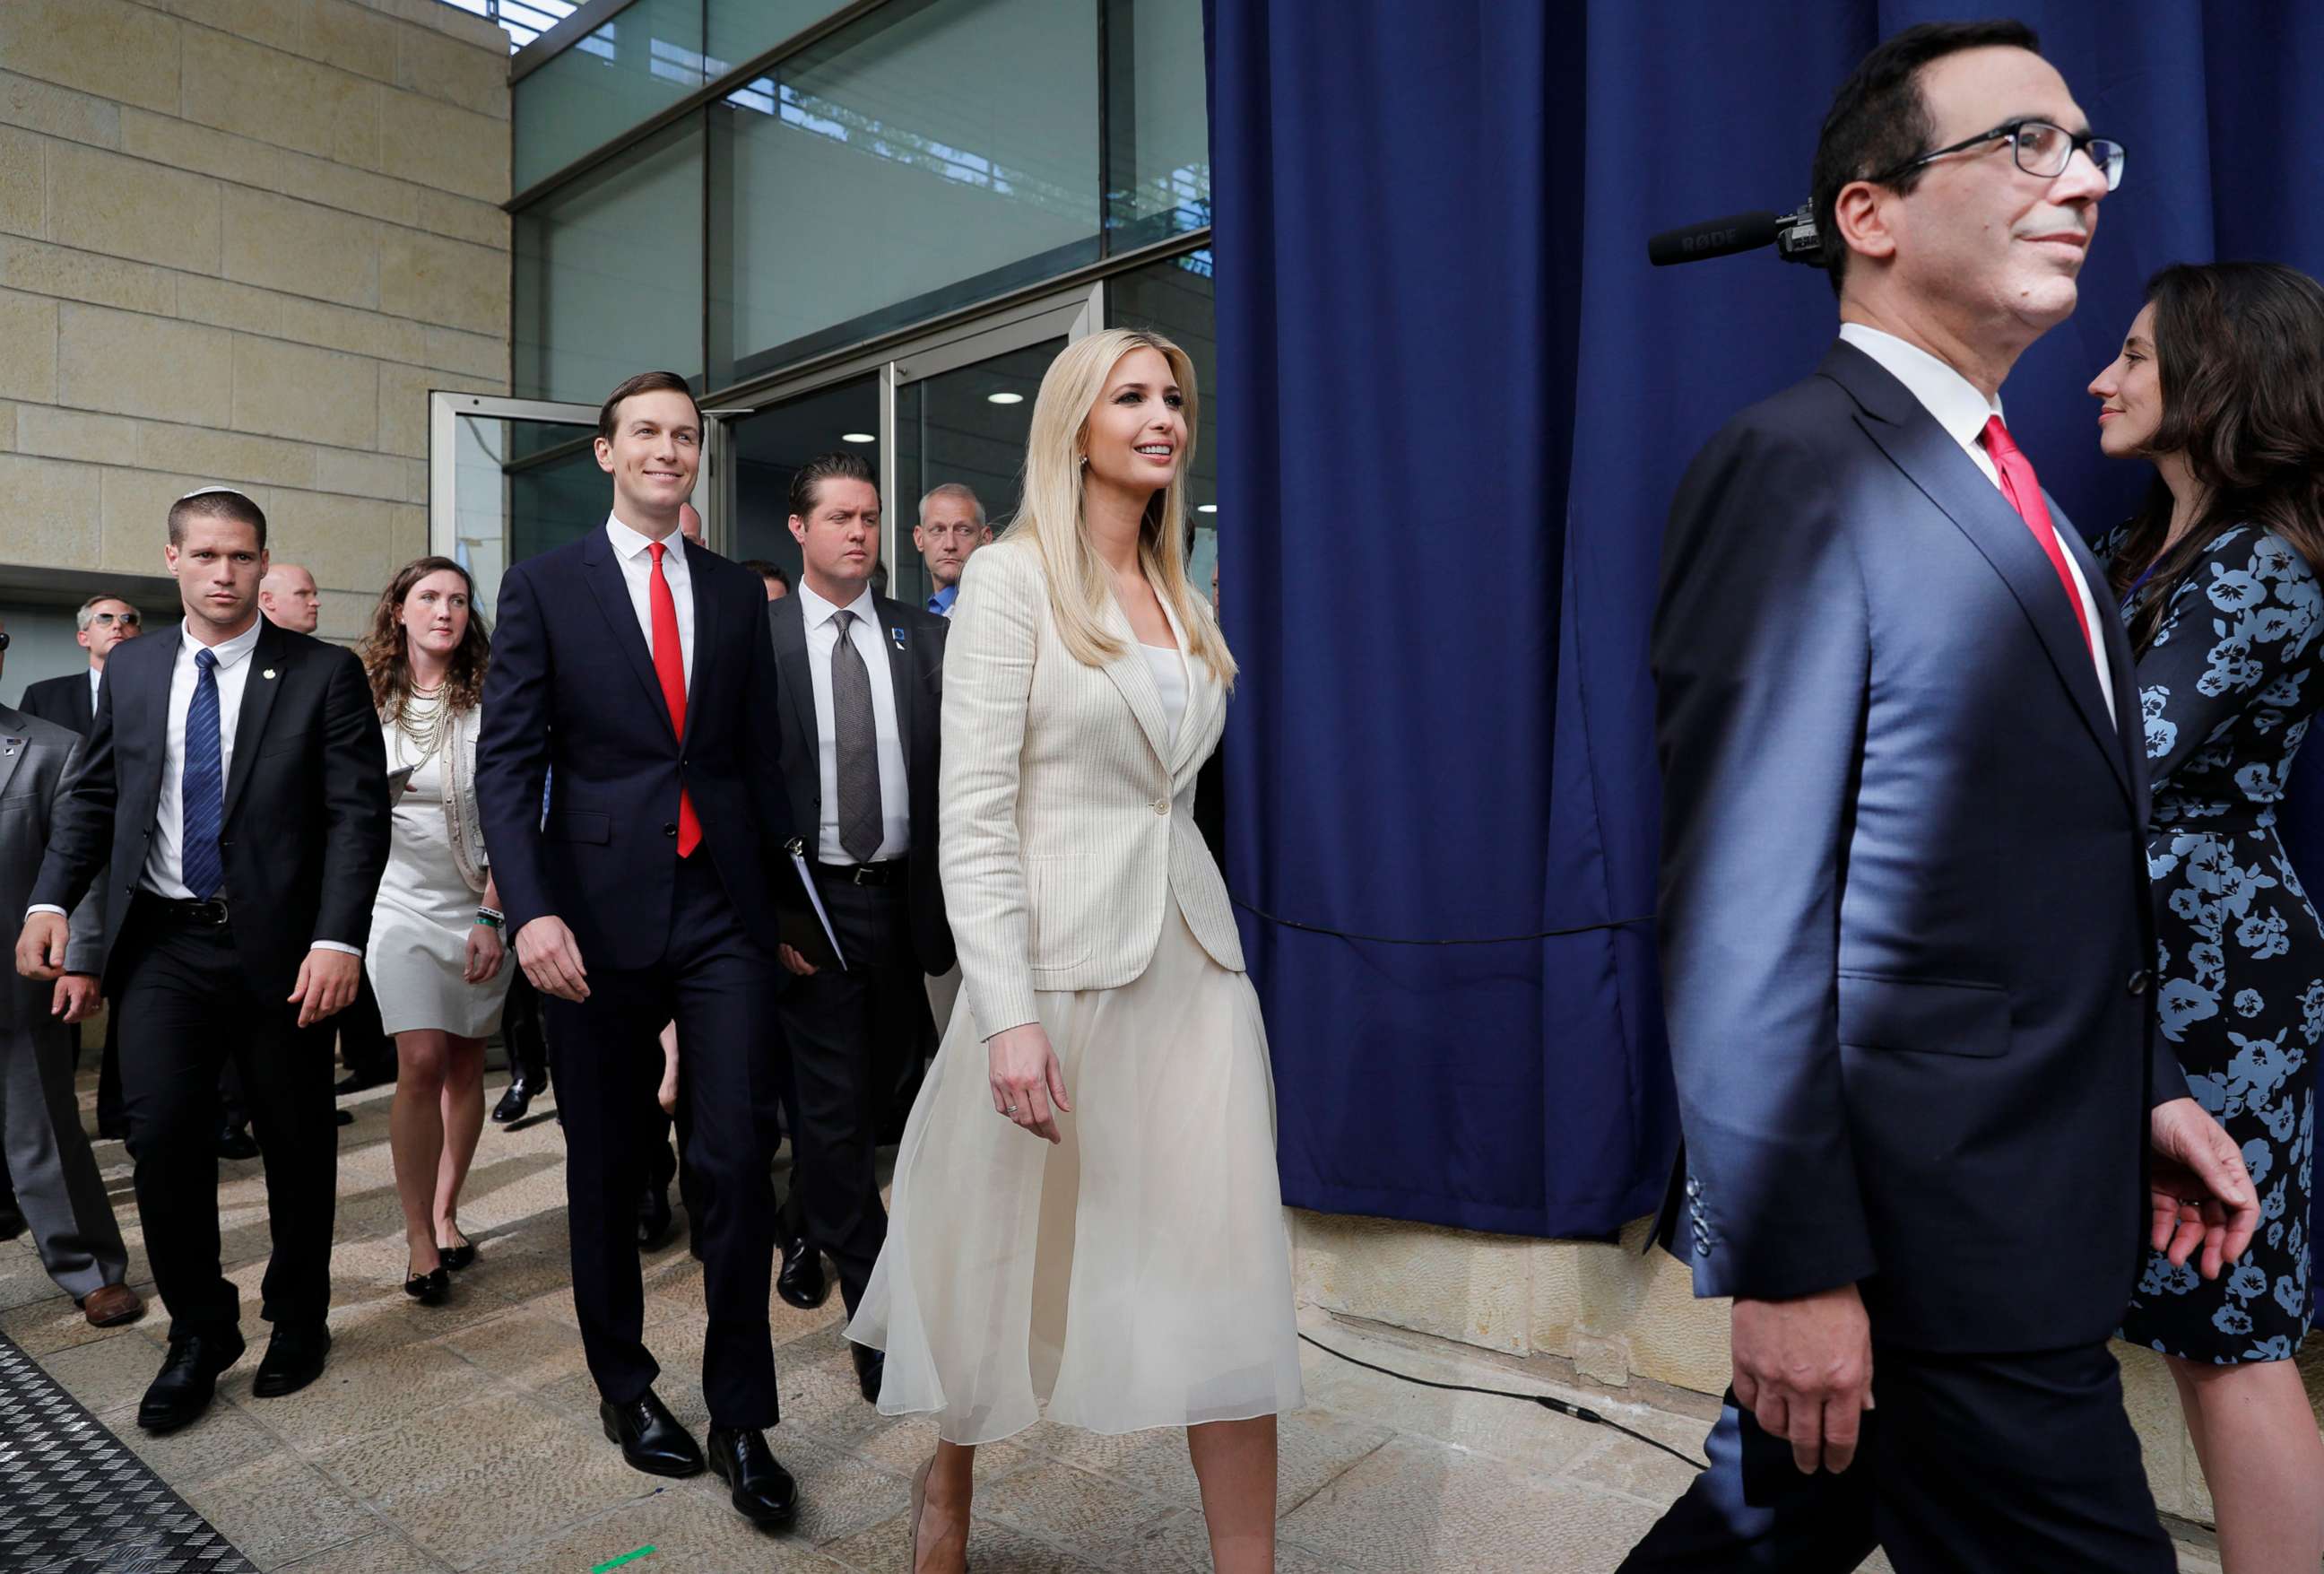 PHOTO: White House senior advisers Jared Kushner, Ivanka Trump, and Treasury Secretary Steven Mnuchin arrive for the opening ceremony at the U.S. consulate that will act as the new embassy in Jerusalem, Israel, May 14, 2018.